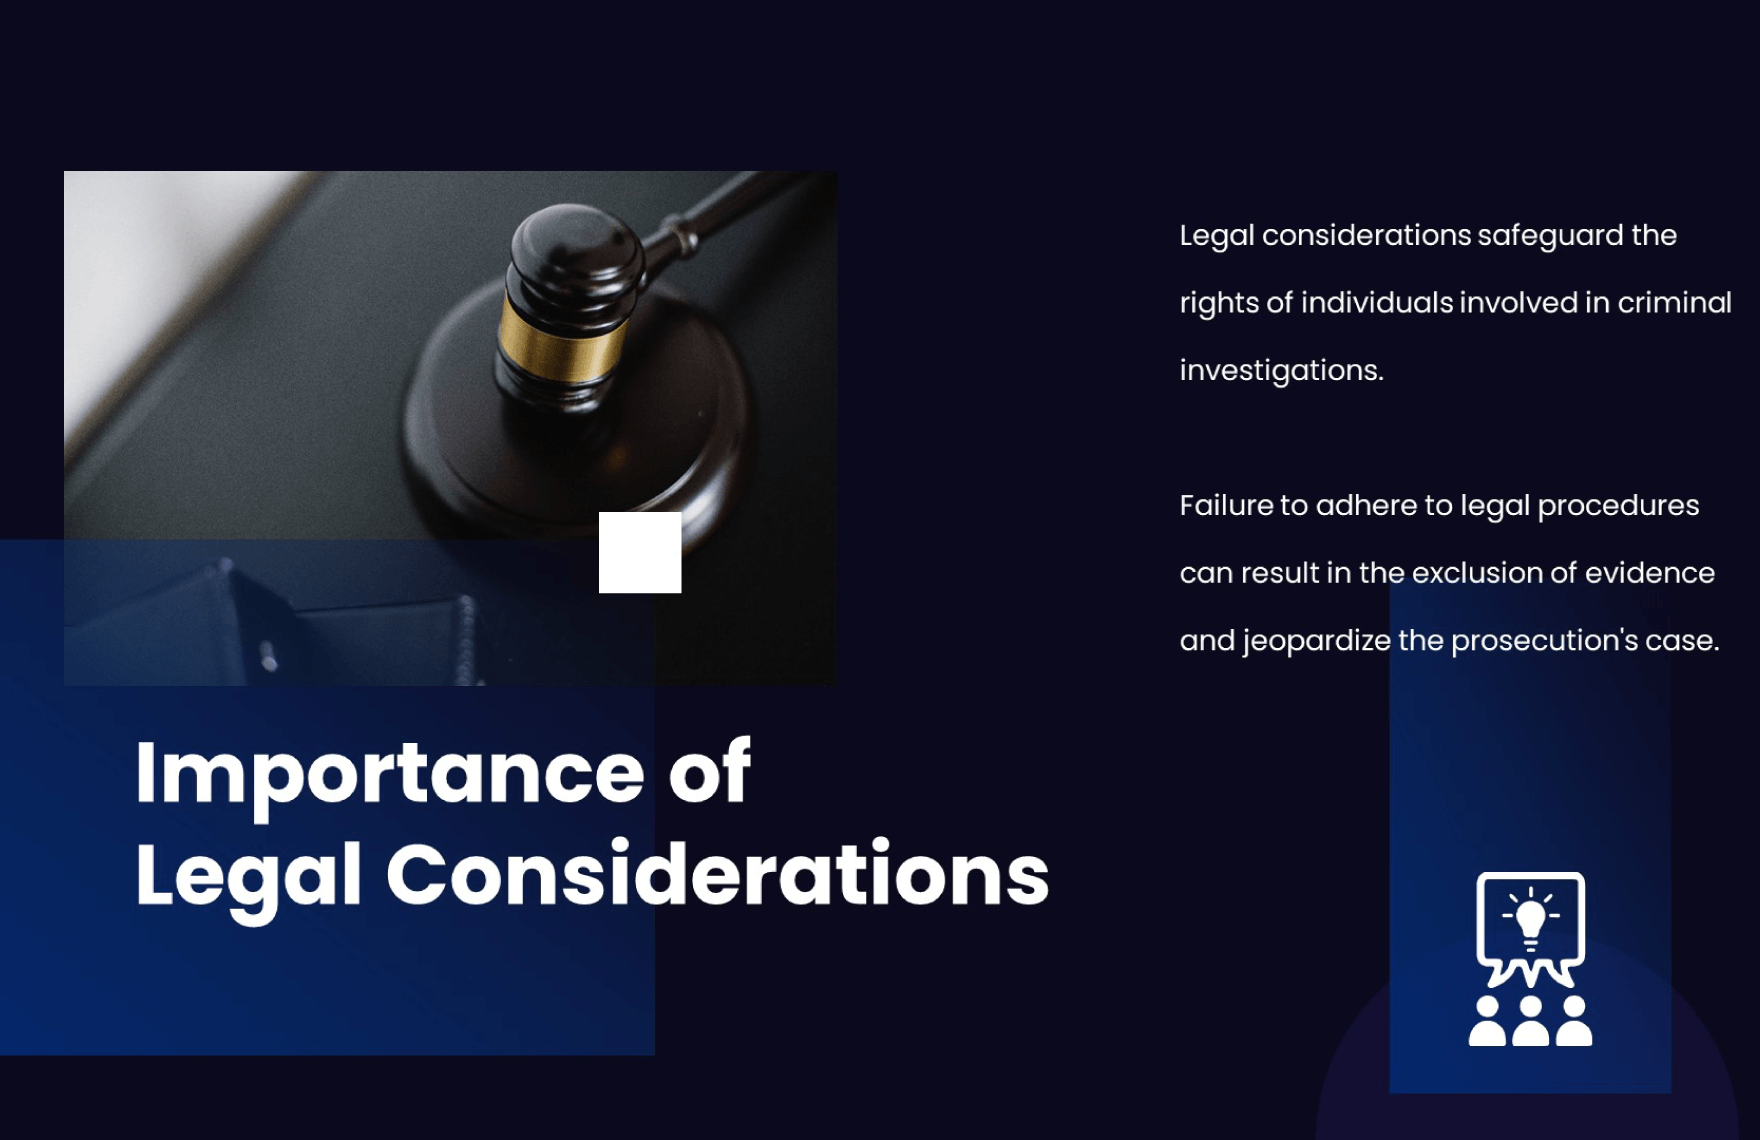 Legal Considerations at Crime Scene PPT Template